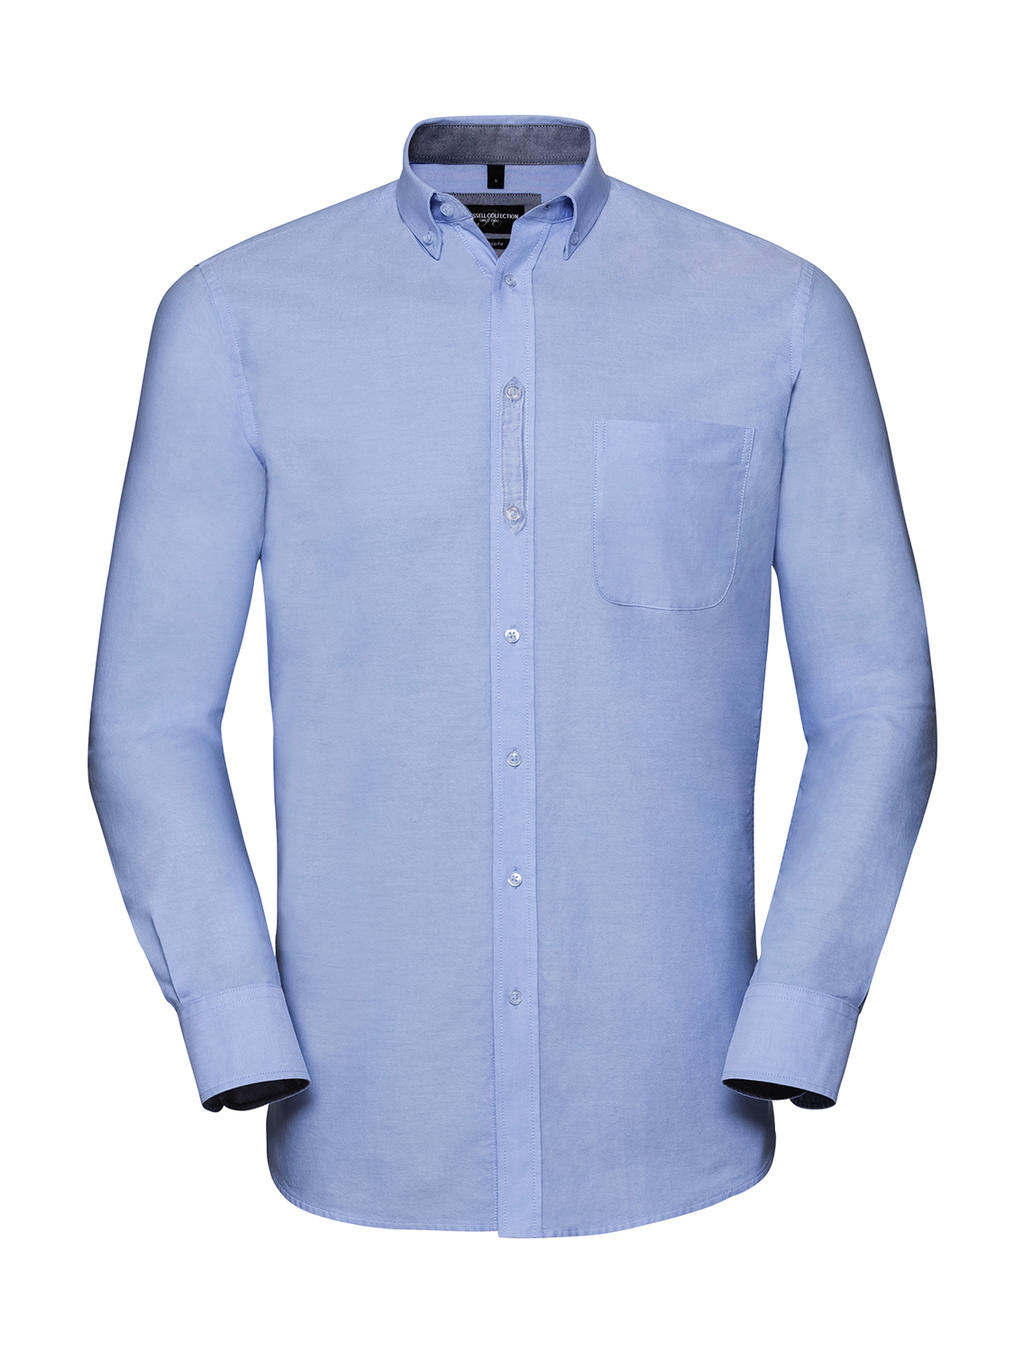  Mens LS Tailored Washed Oxford Shirt in Farbe Oxford Blue/Oxford Navy